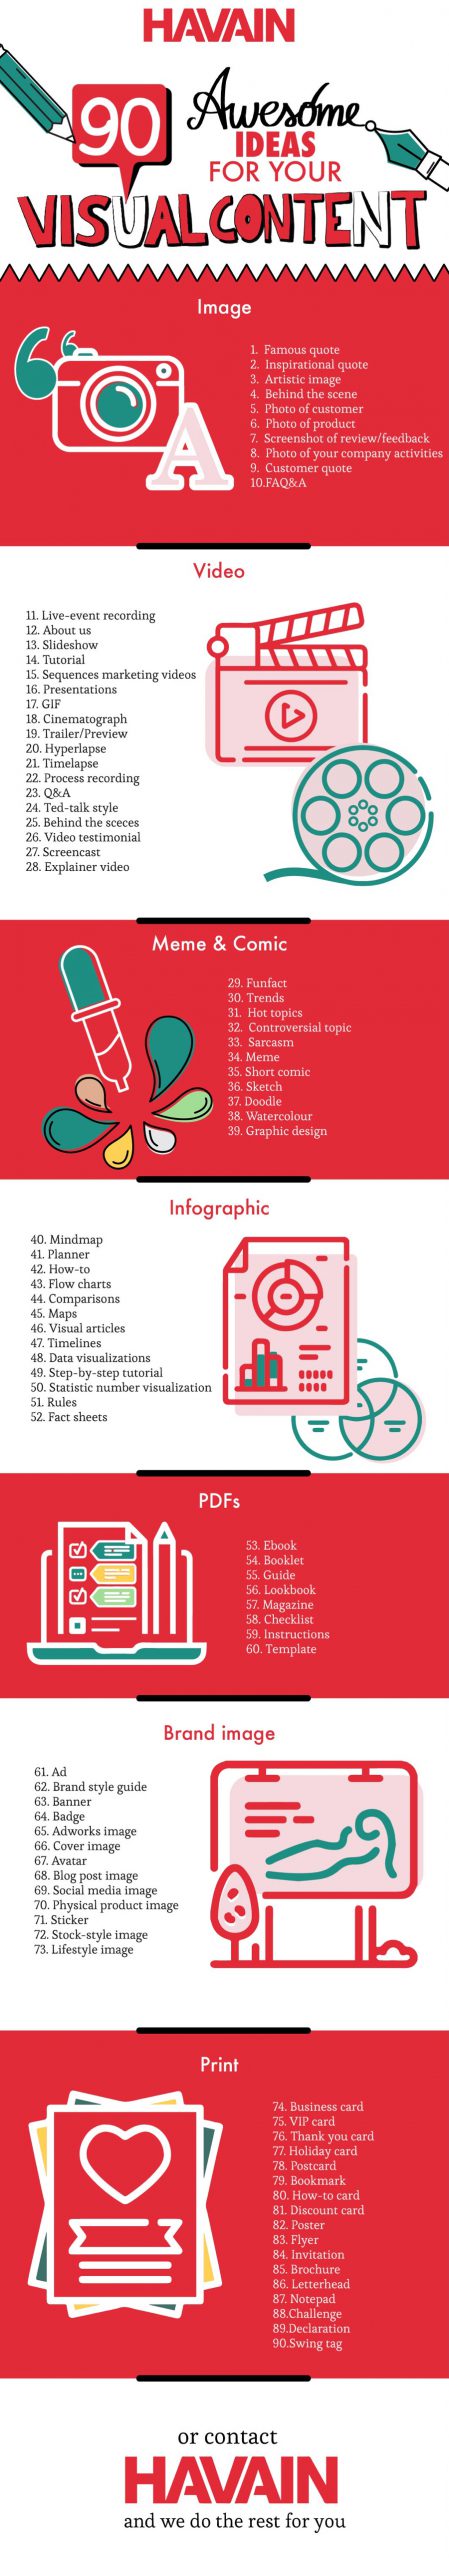 90 awesome visual content ideas